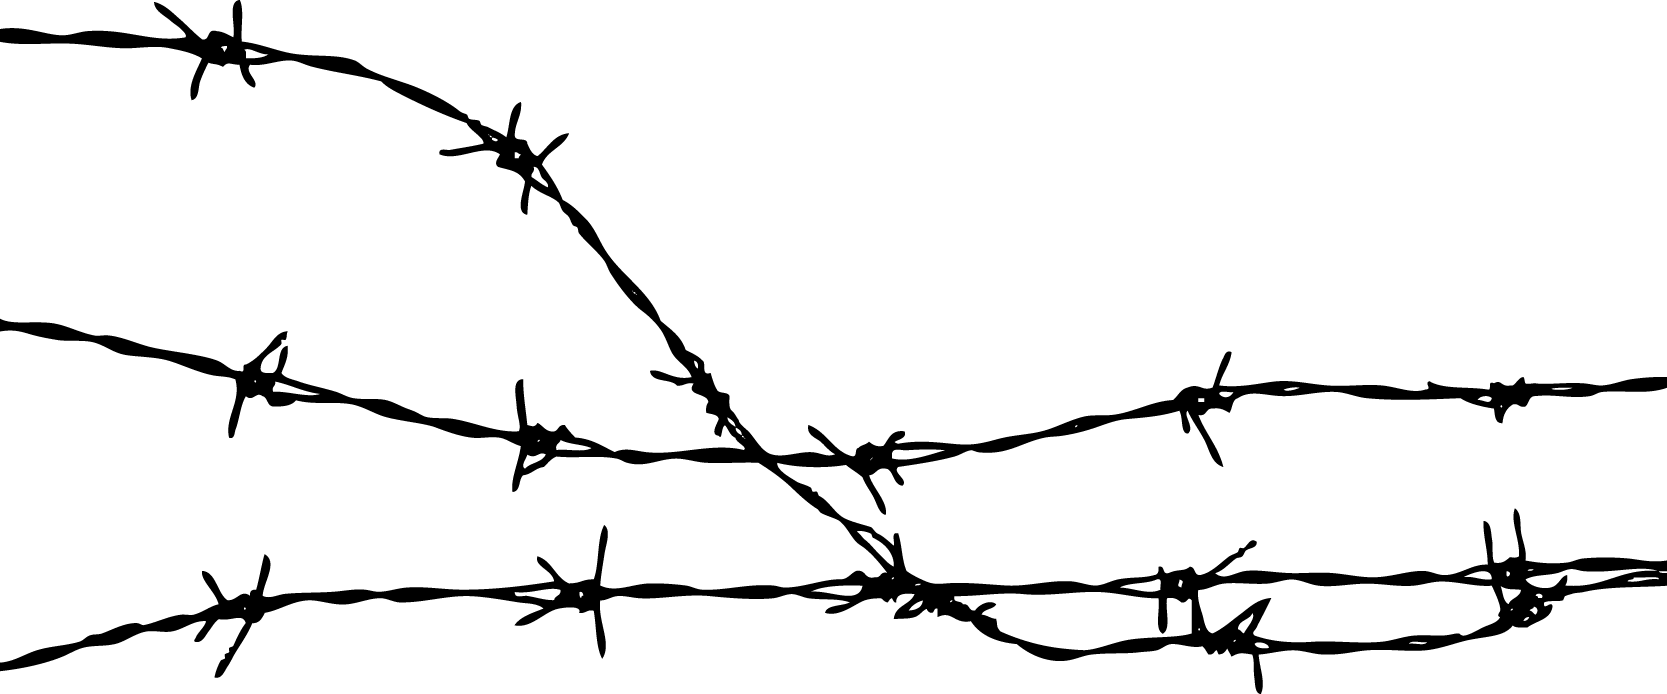 HQ Barb Wire Wallpapers | File 19.78Kb